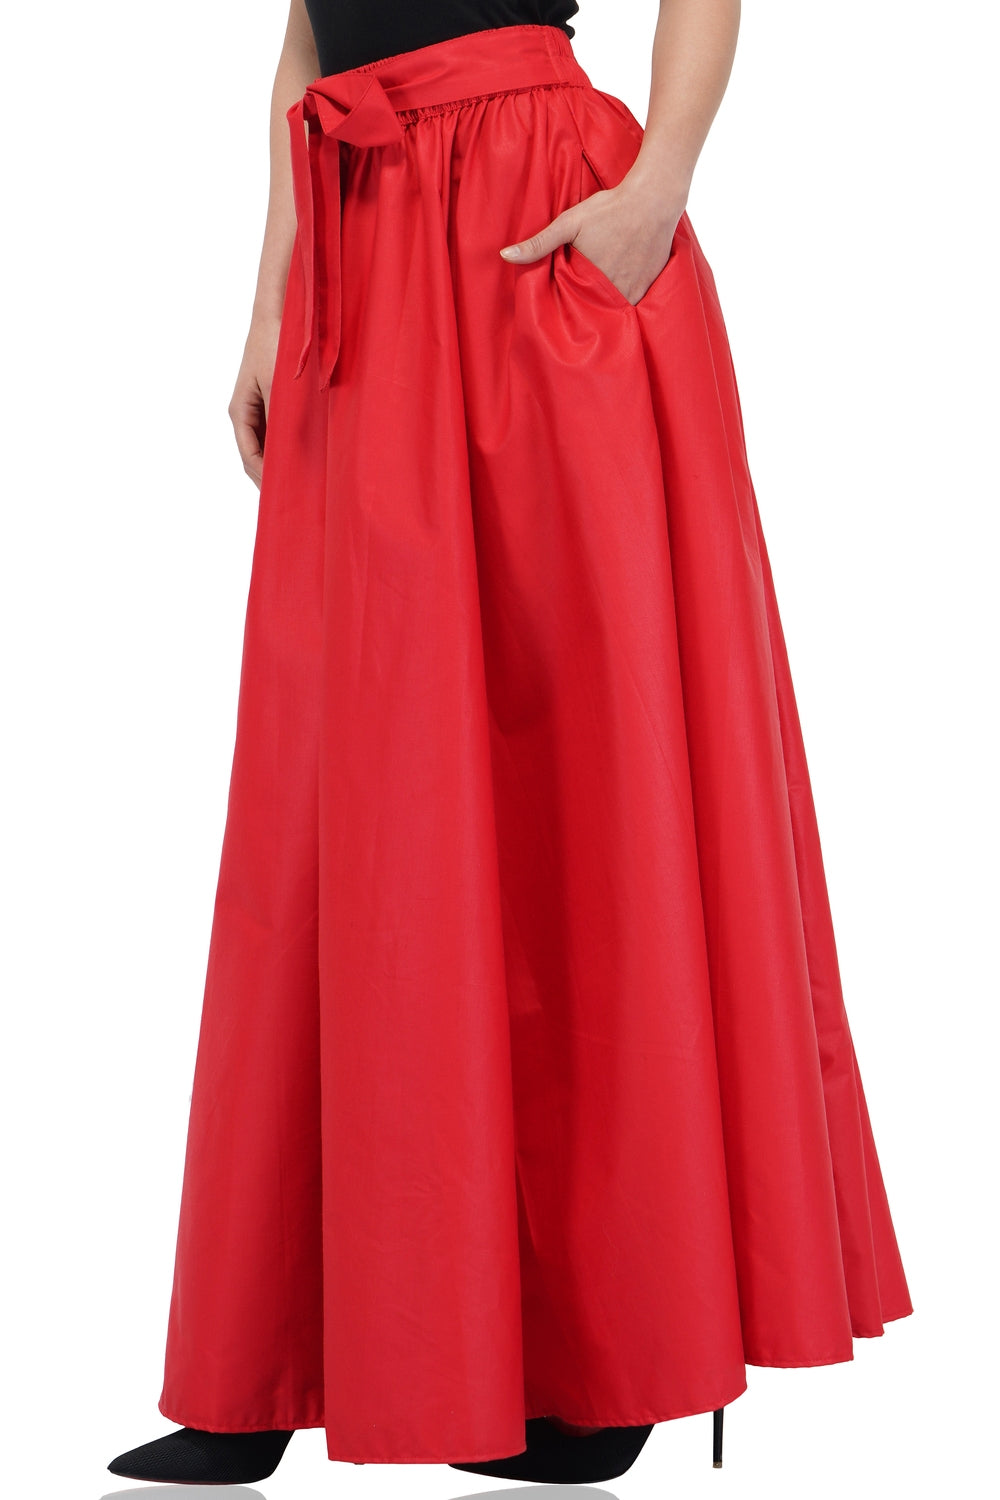 Solid Red Long Maxi Skirt